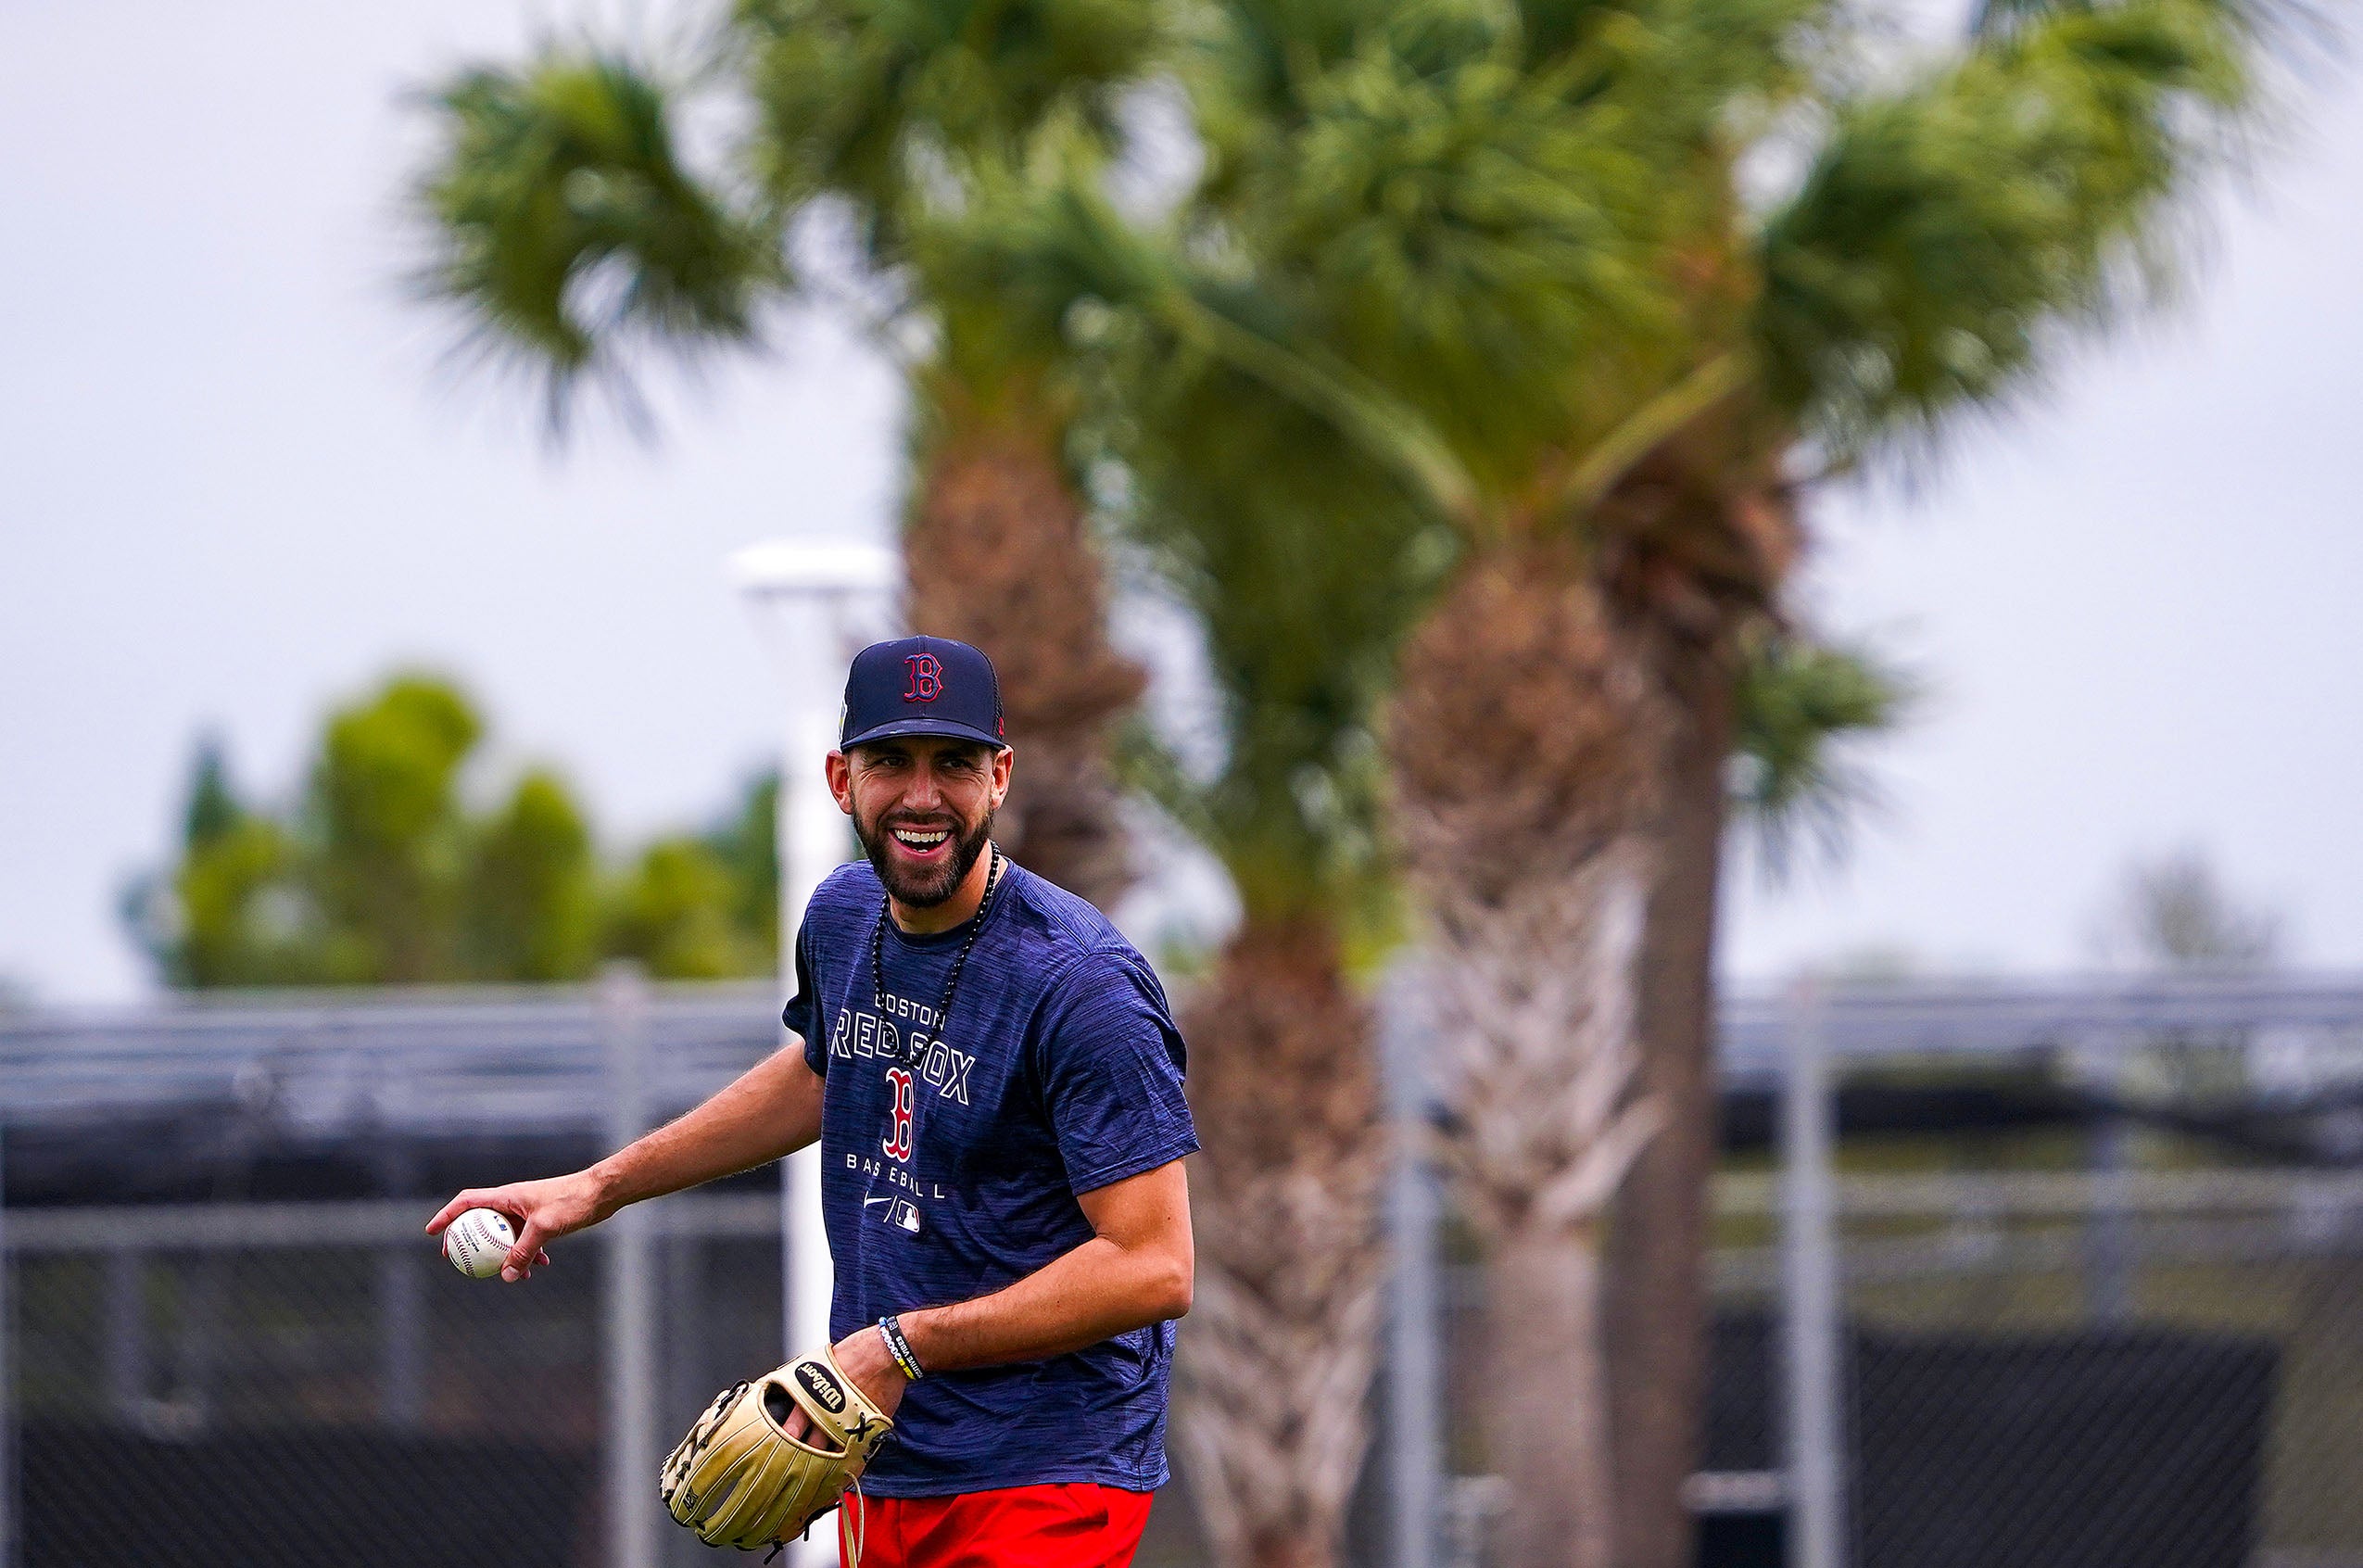 Man smiling, holding a baseball and baseball glove, wearing a Boston Red Sox hat and t-shirt. Behind him is a palm tree and fence..